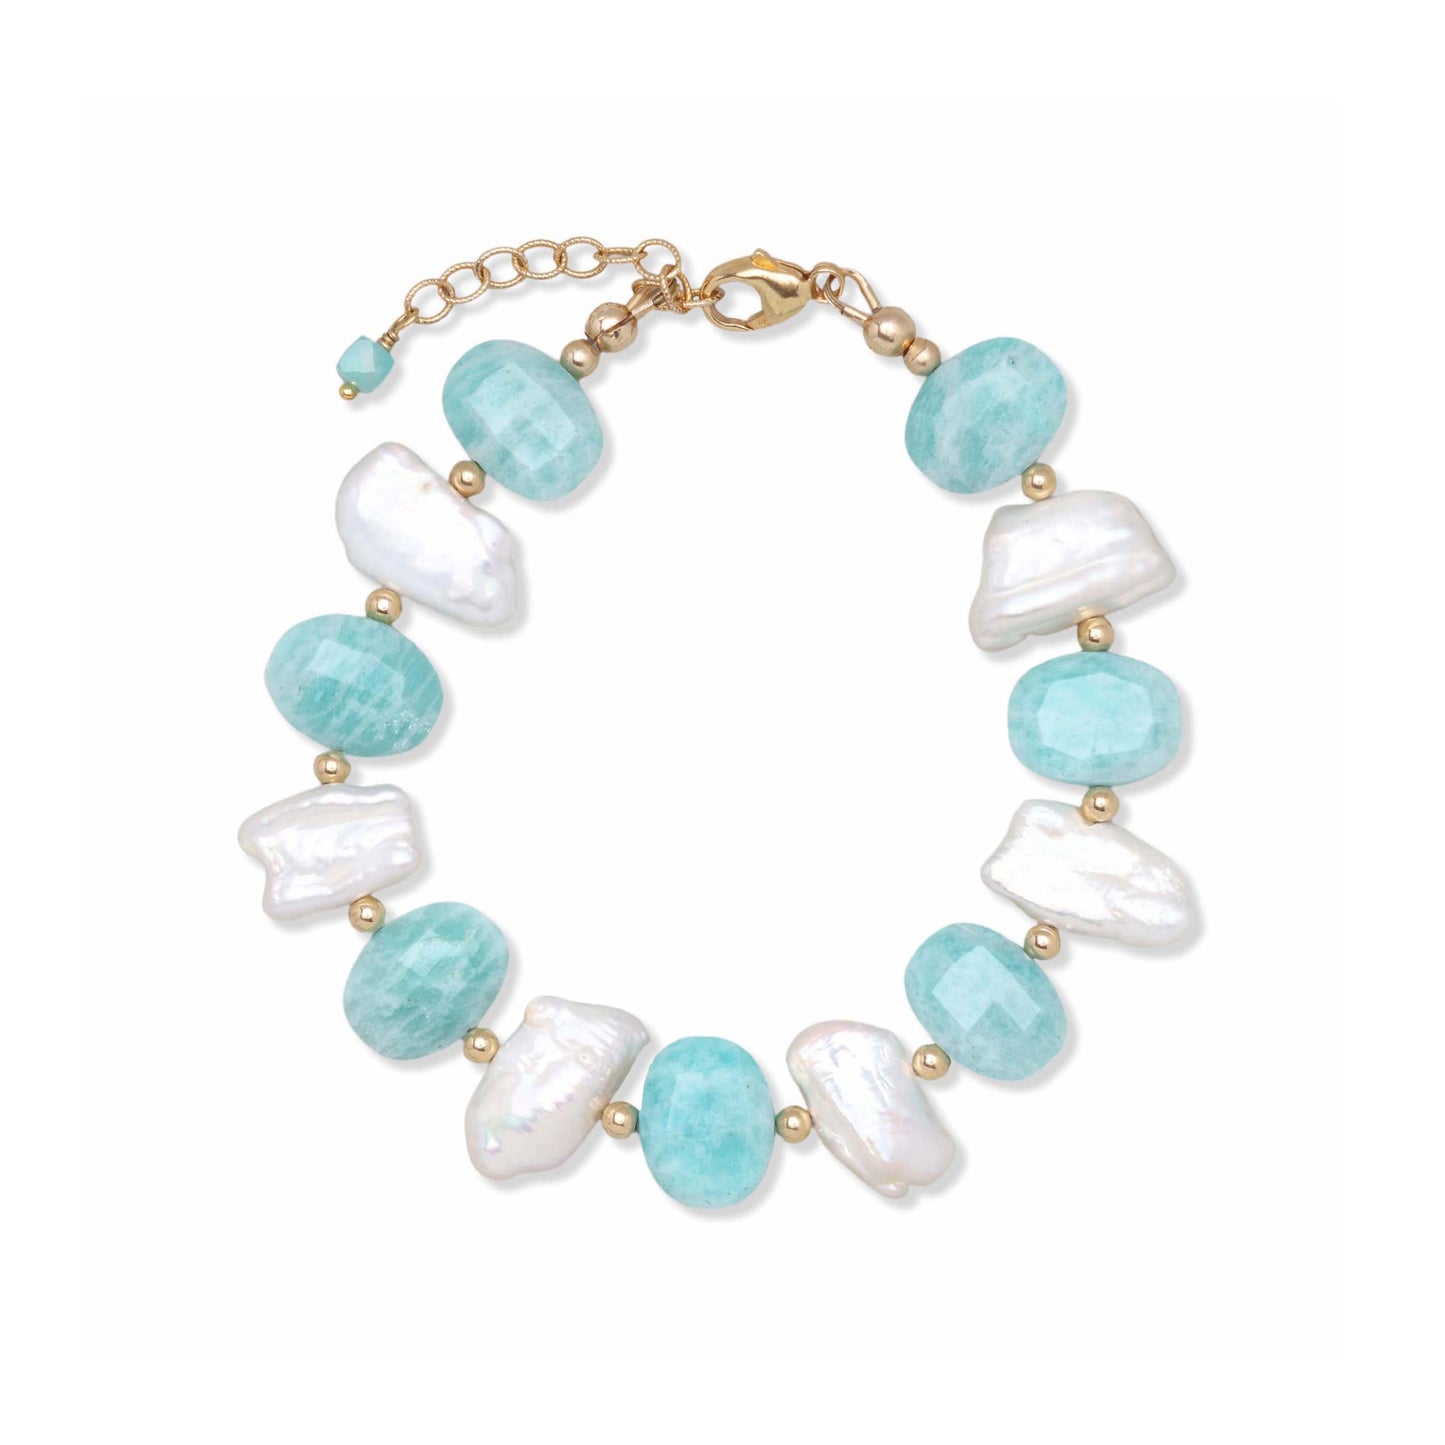 White biwa pearl and faceted amazonite bracelet with gold filled beads and clasp